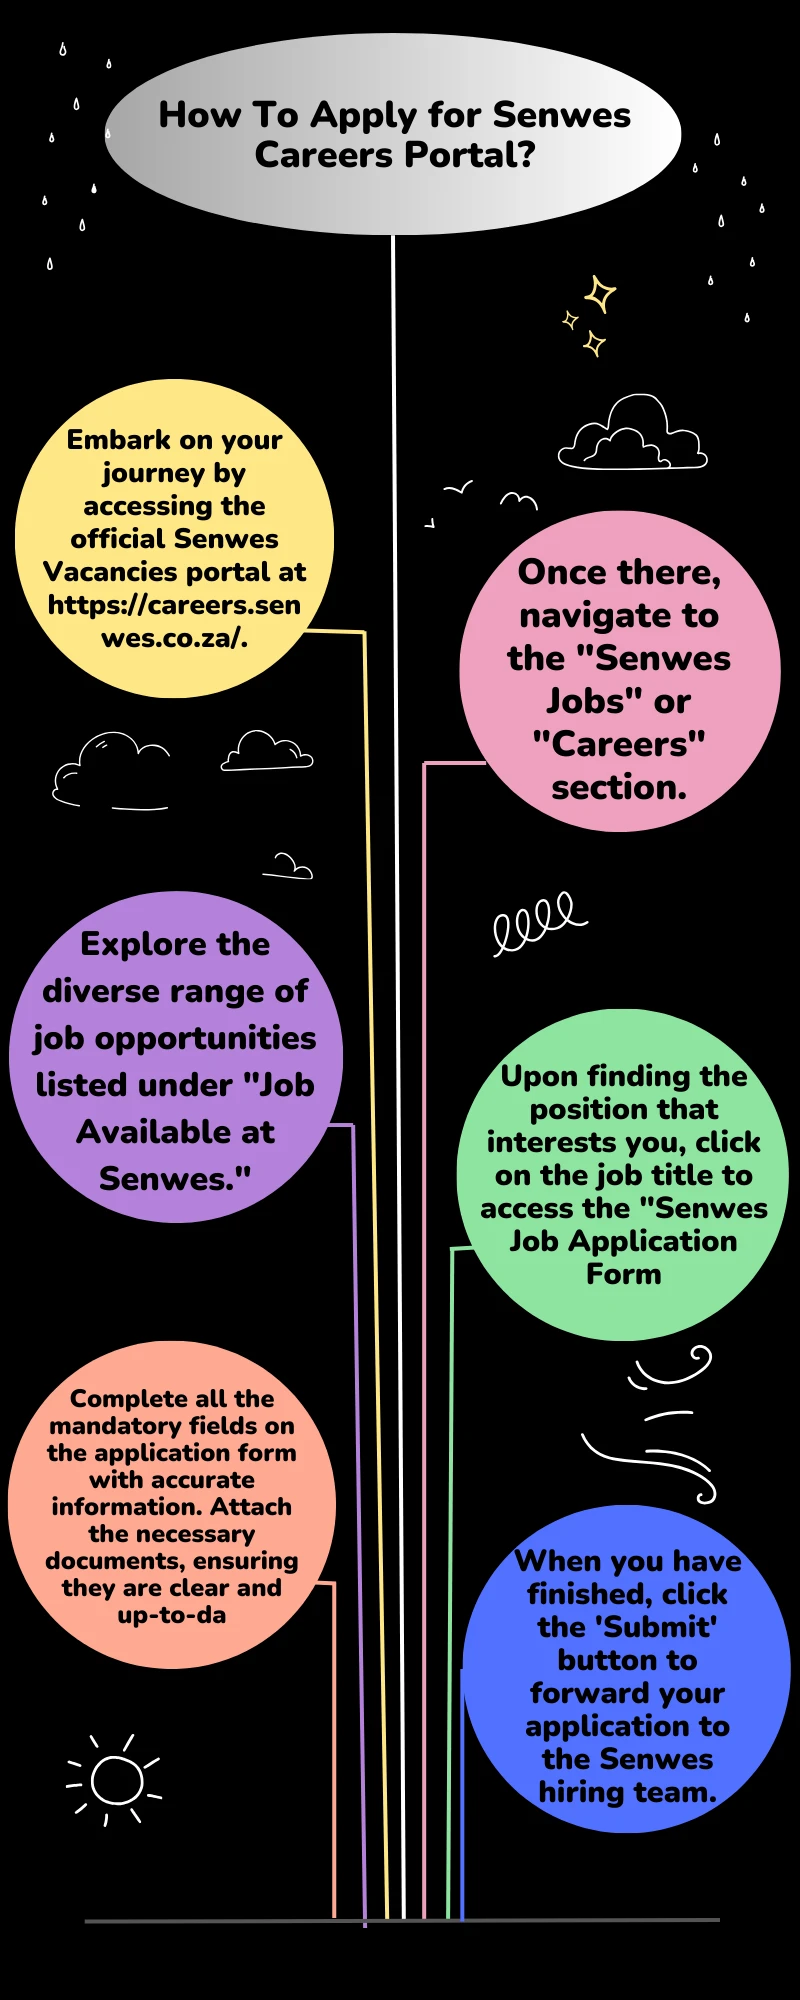 How To Apply for Senwes Careers Portal?